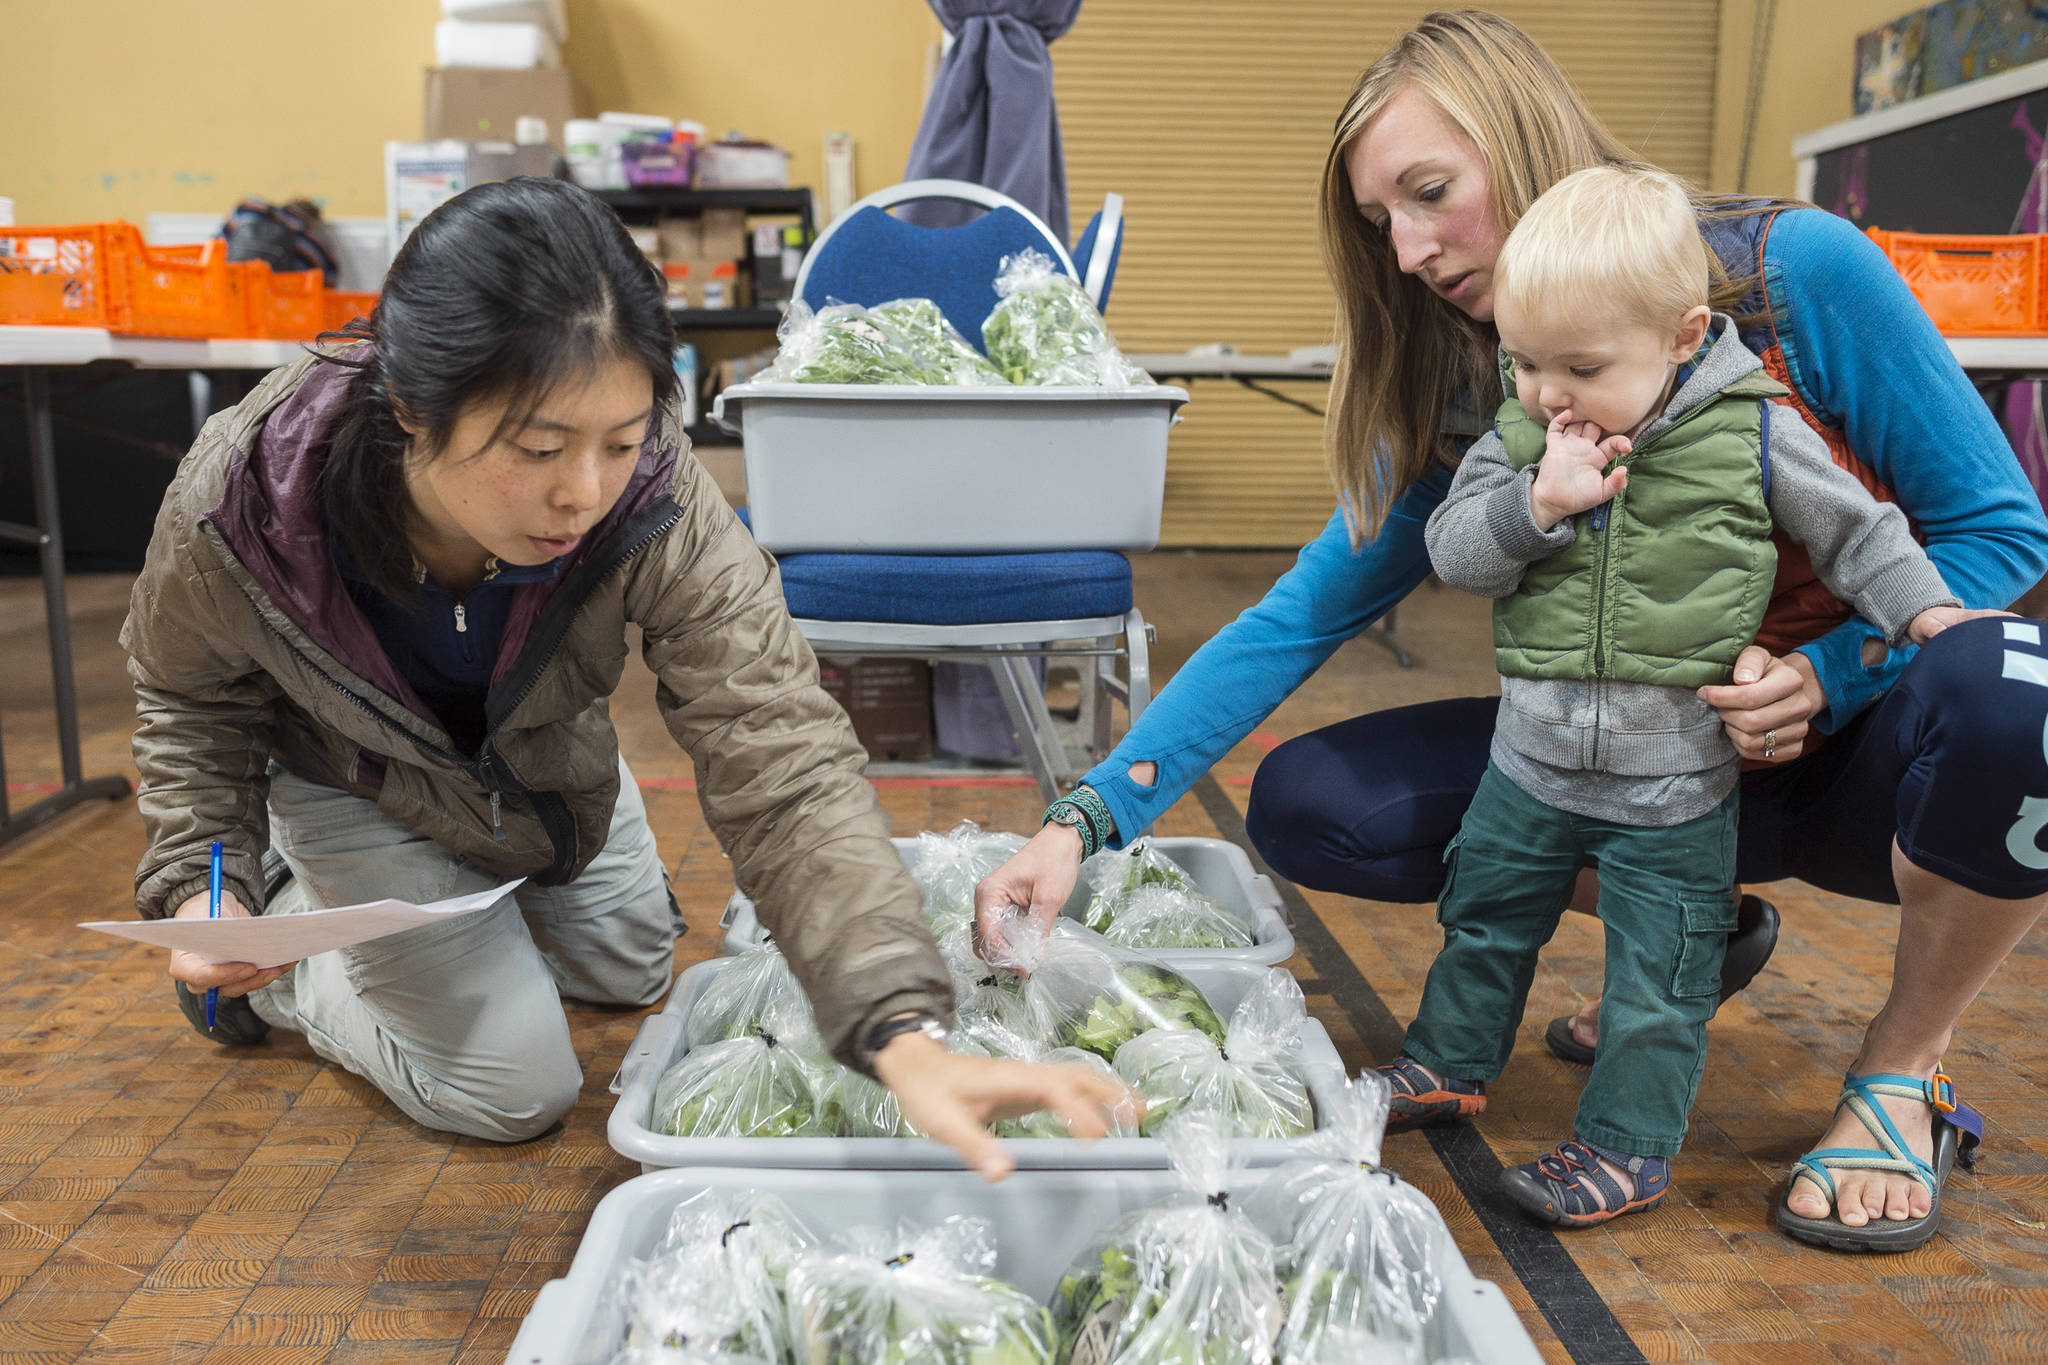 Jennifer Nu, Local Foods Director at Southeast Alaska Watershed Coalition, left, takes inventory of fresh grown greens being delivered by Jackie Ebert, of Nunatak Foods, with her son Oliver, to the Salt & Soil Marketplace location at the Arts & Culture Center on Thursday, Oct. 18, 2018. The nonprofit Salt and Soil Marketplace is staying open this winter and will offer a new Valley location to pick up Southeast-grown foods. (Michael Penn | Juneau Empire)